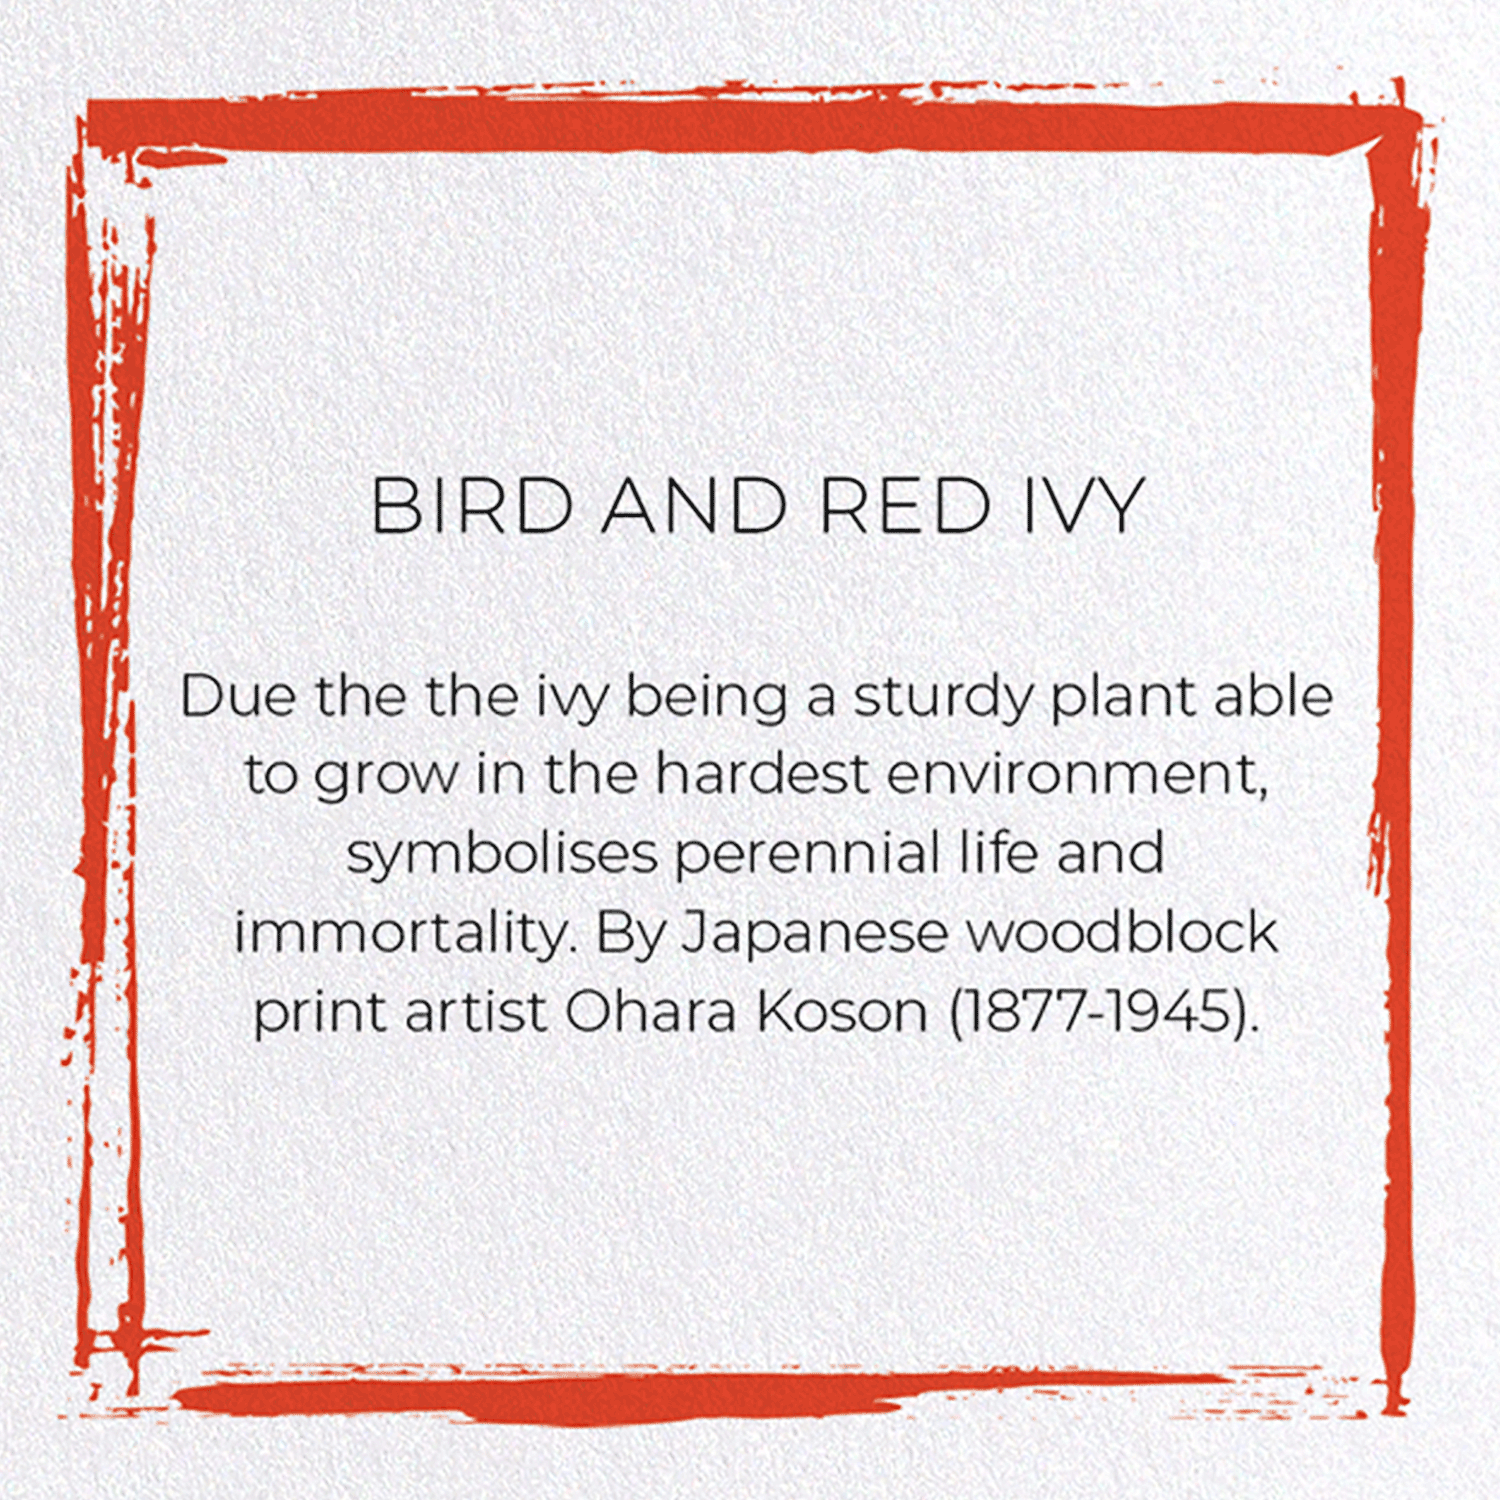 BIRD AND RED IVY